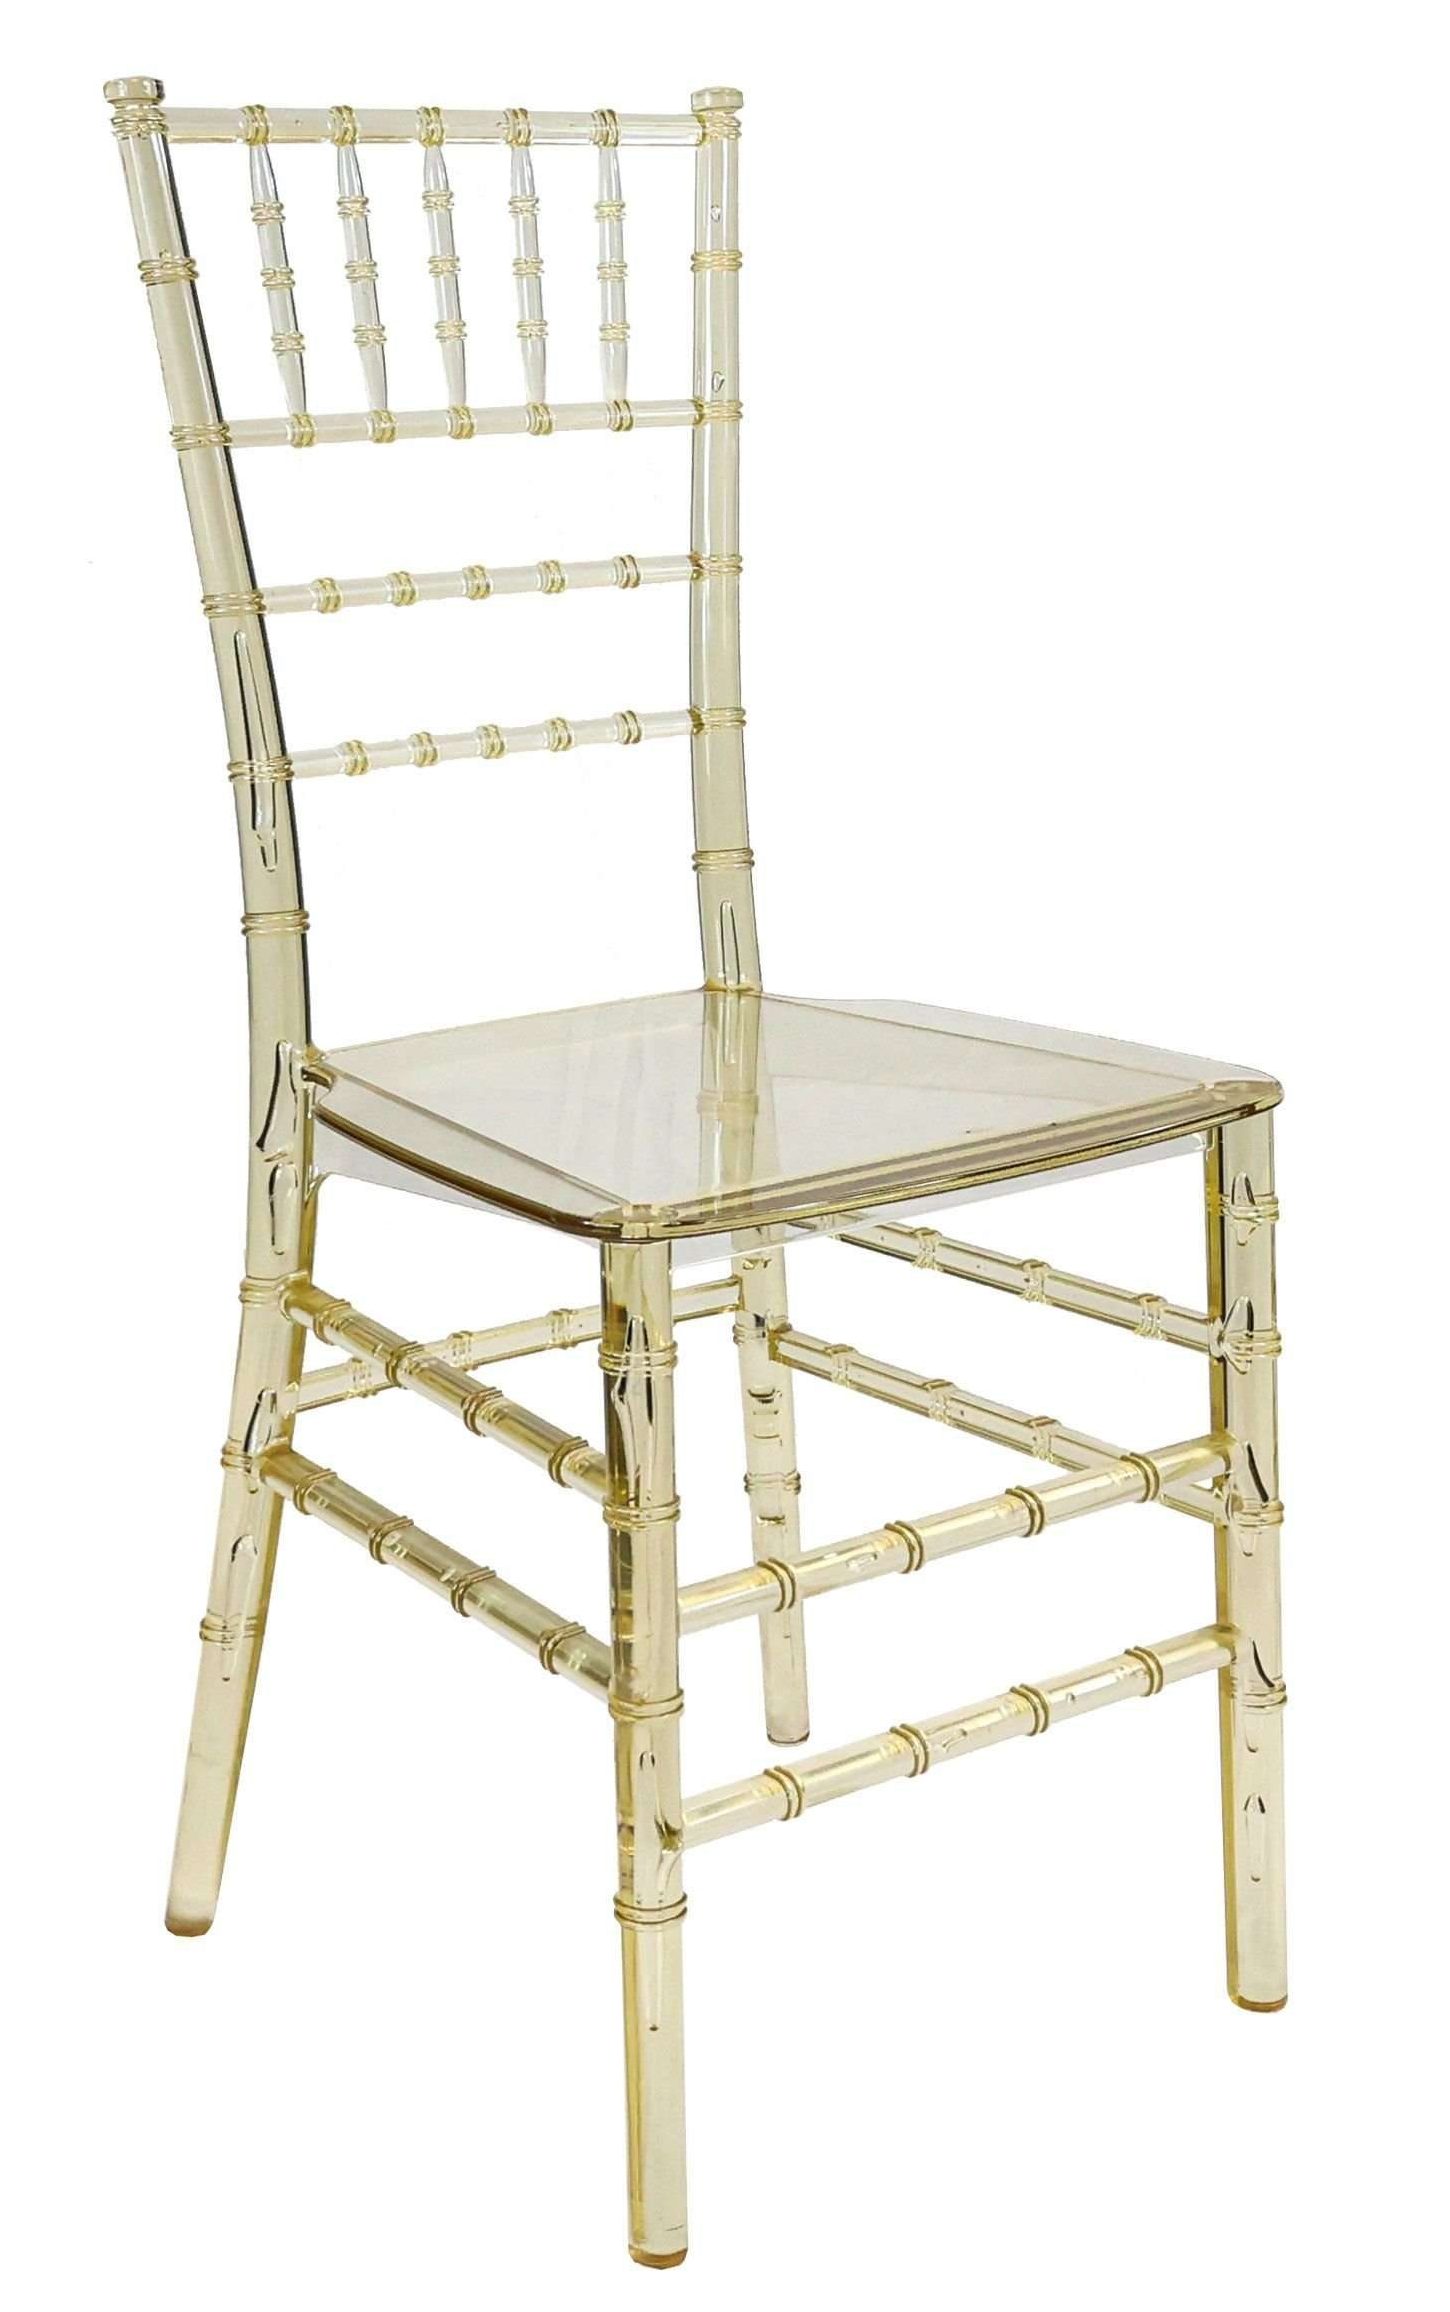 Chair Chiavari Resin Clear Gold Champagne Mono Frame ThinVisible Seat Z Series CCRCHG MONO THIN ZG T Right